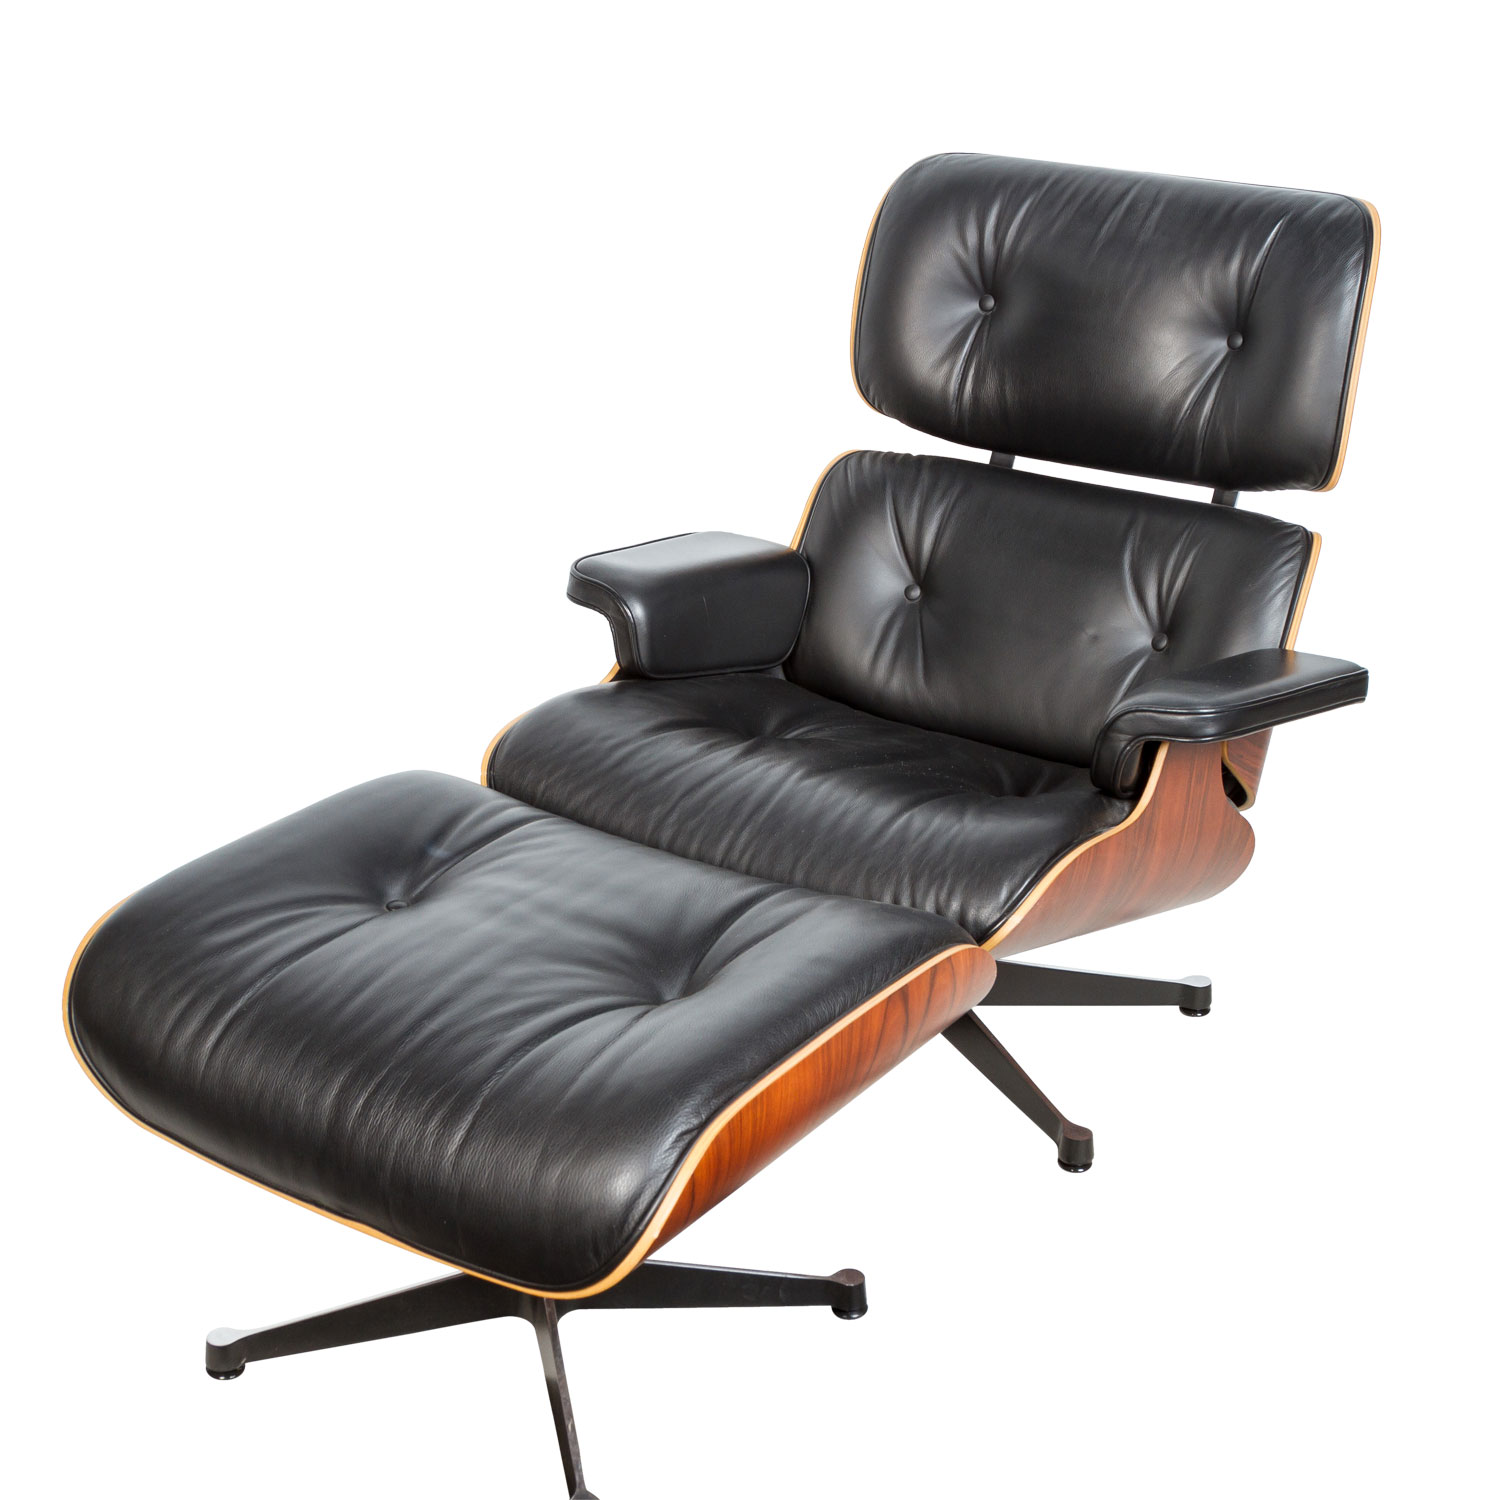 RAY & CHARLES EAMES "Lounge Chair mit Ottomane" - Image 2 of 7